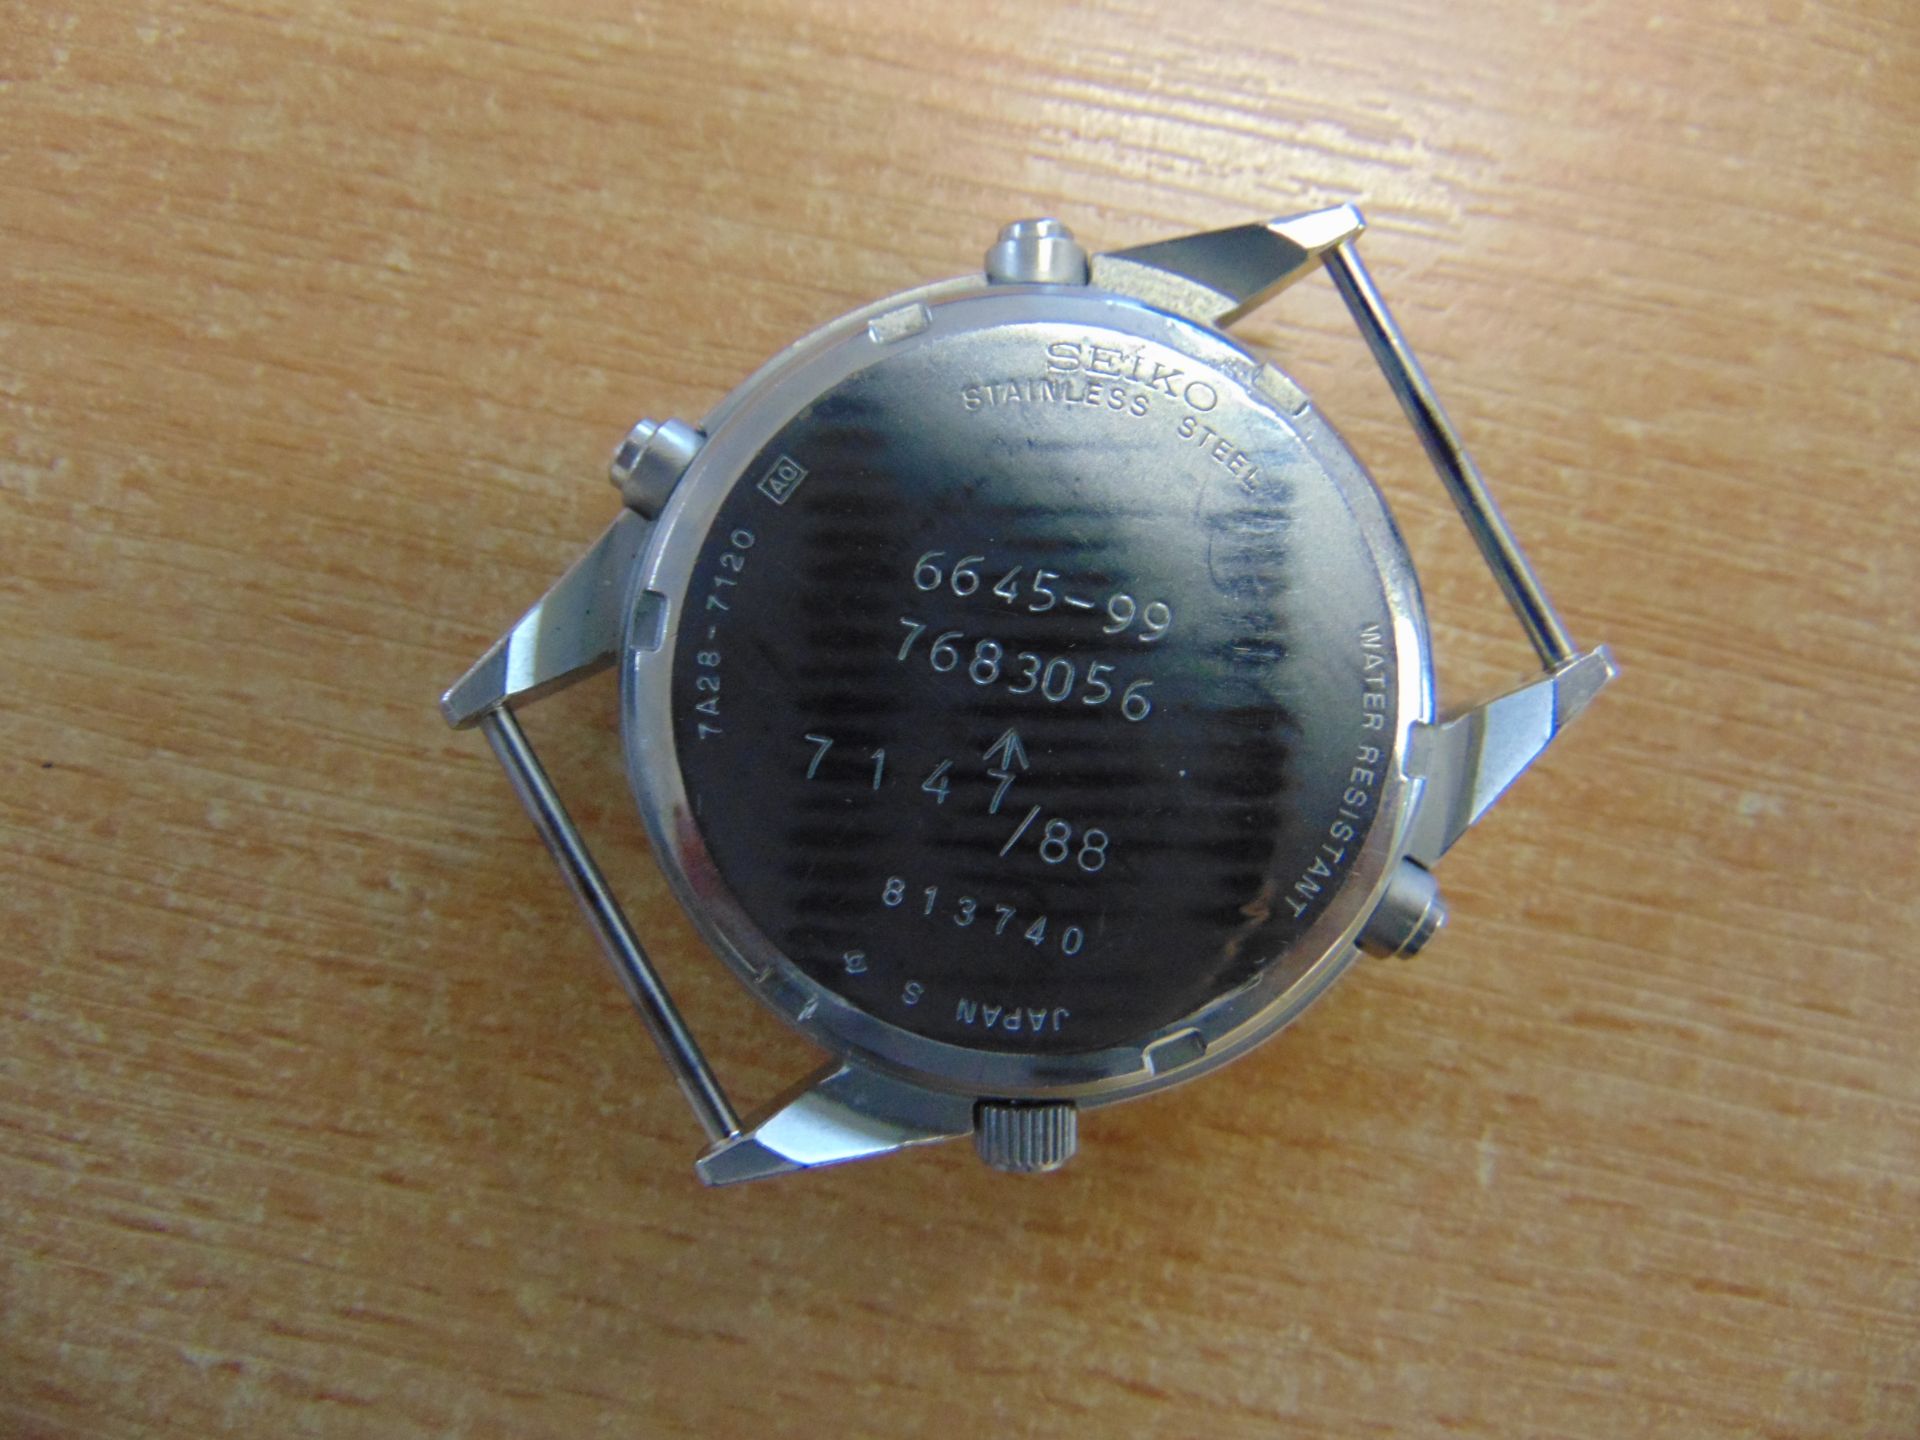 Seiko Gen 1 Pilots Chrono RAF Harrier Force Issue Nato Markings, Date 1988, New Battery & Strap - Image 4 of 5